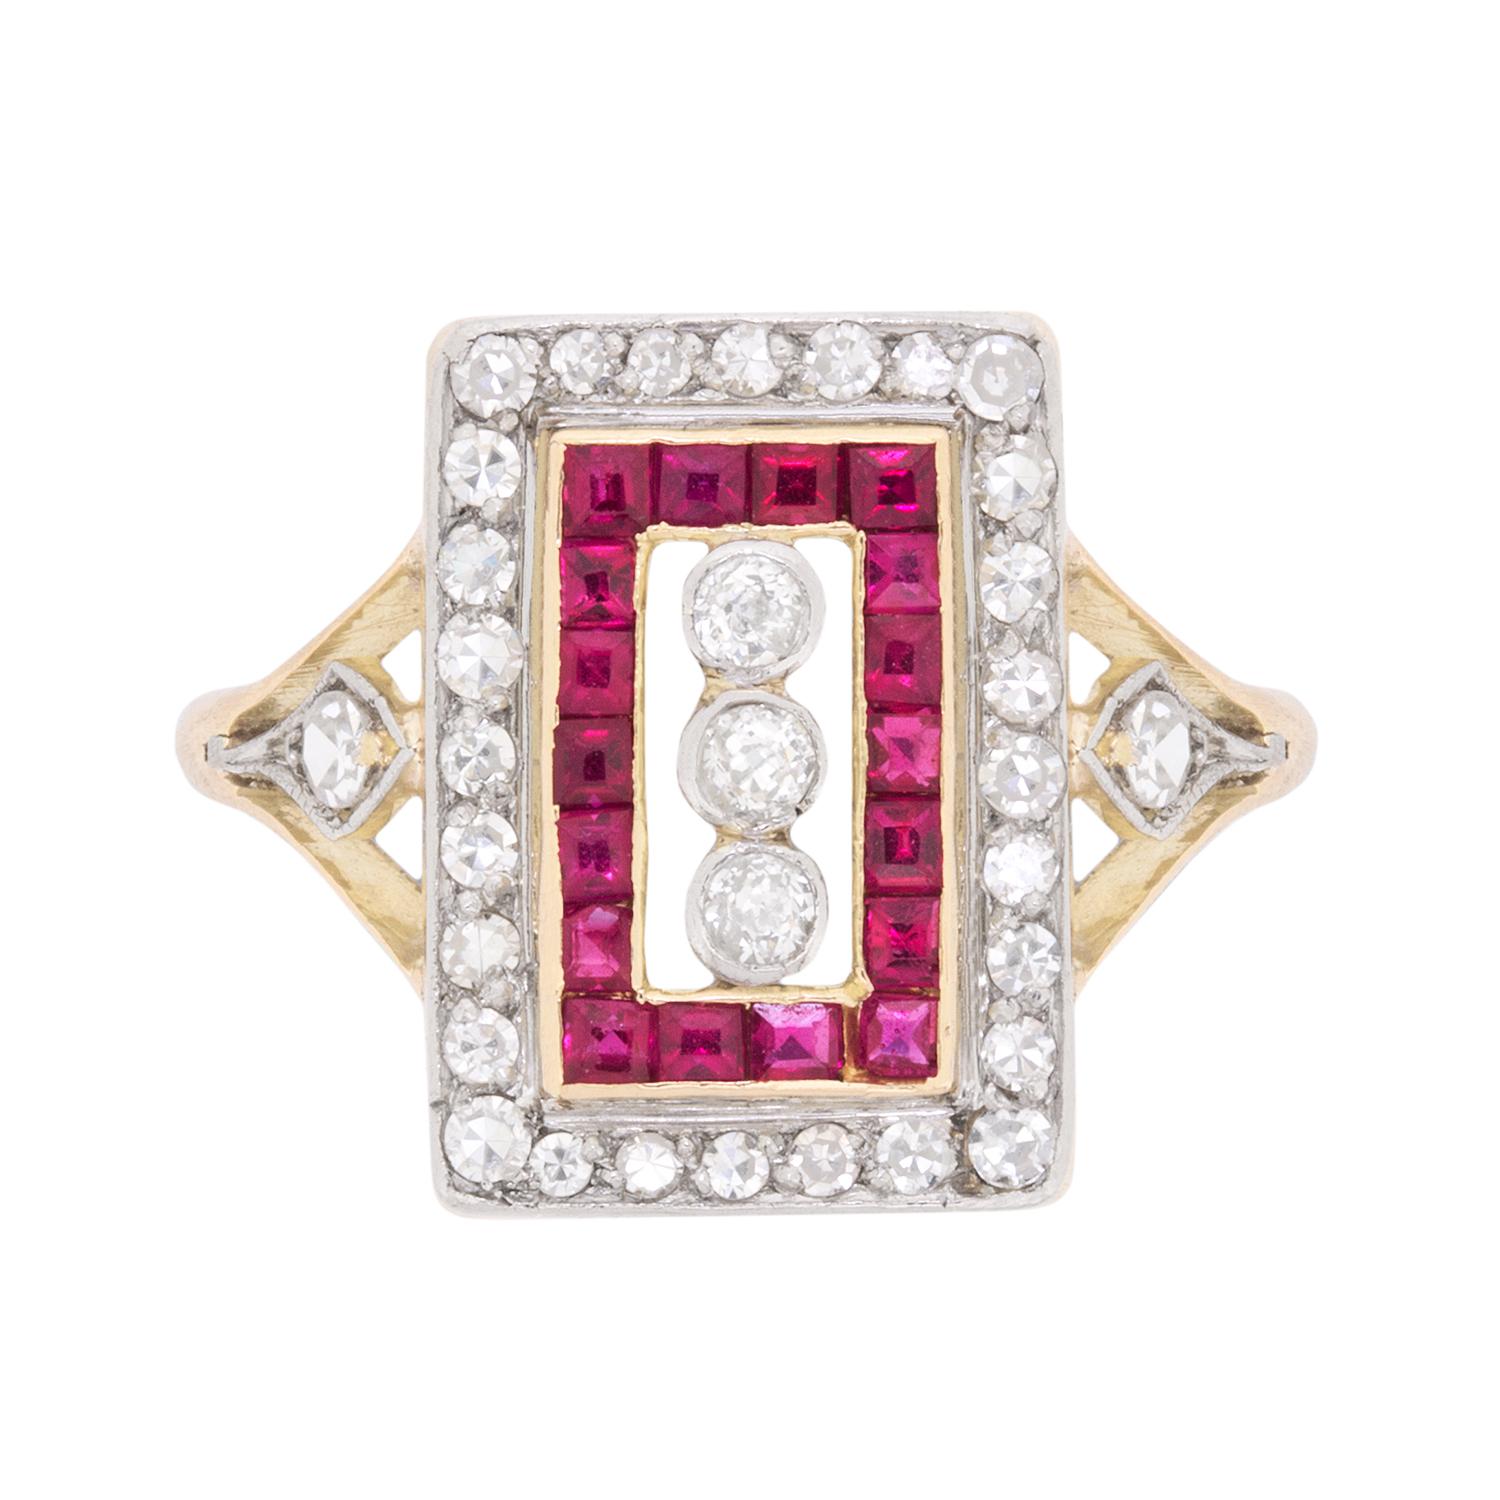 Edwardian Diamond and Ruby Cluster Ring, circa 1910